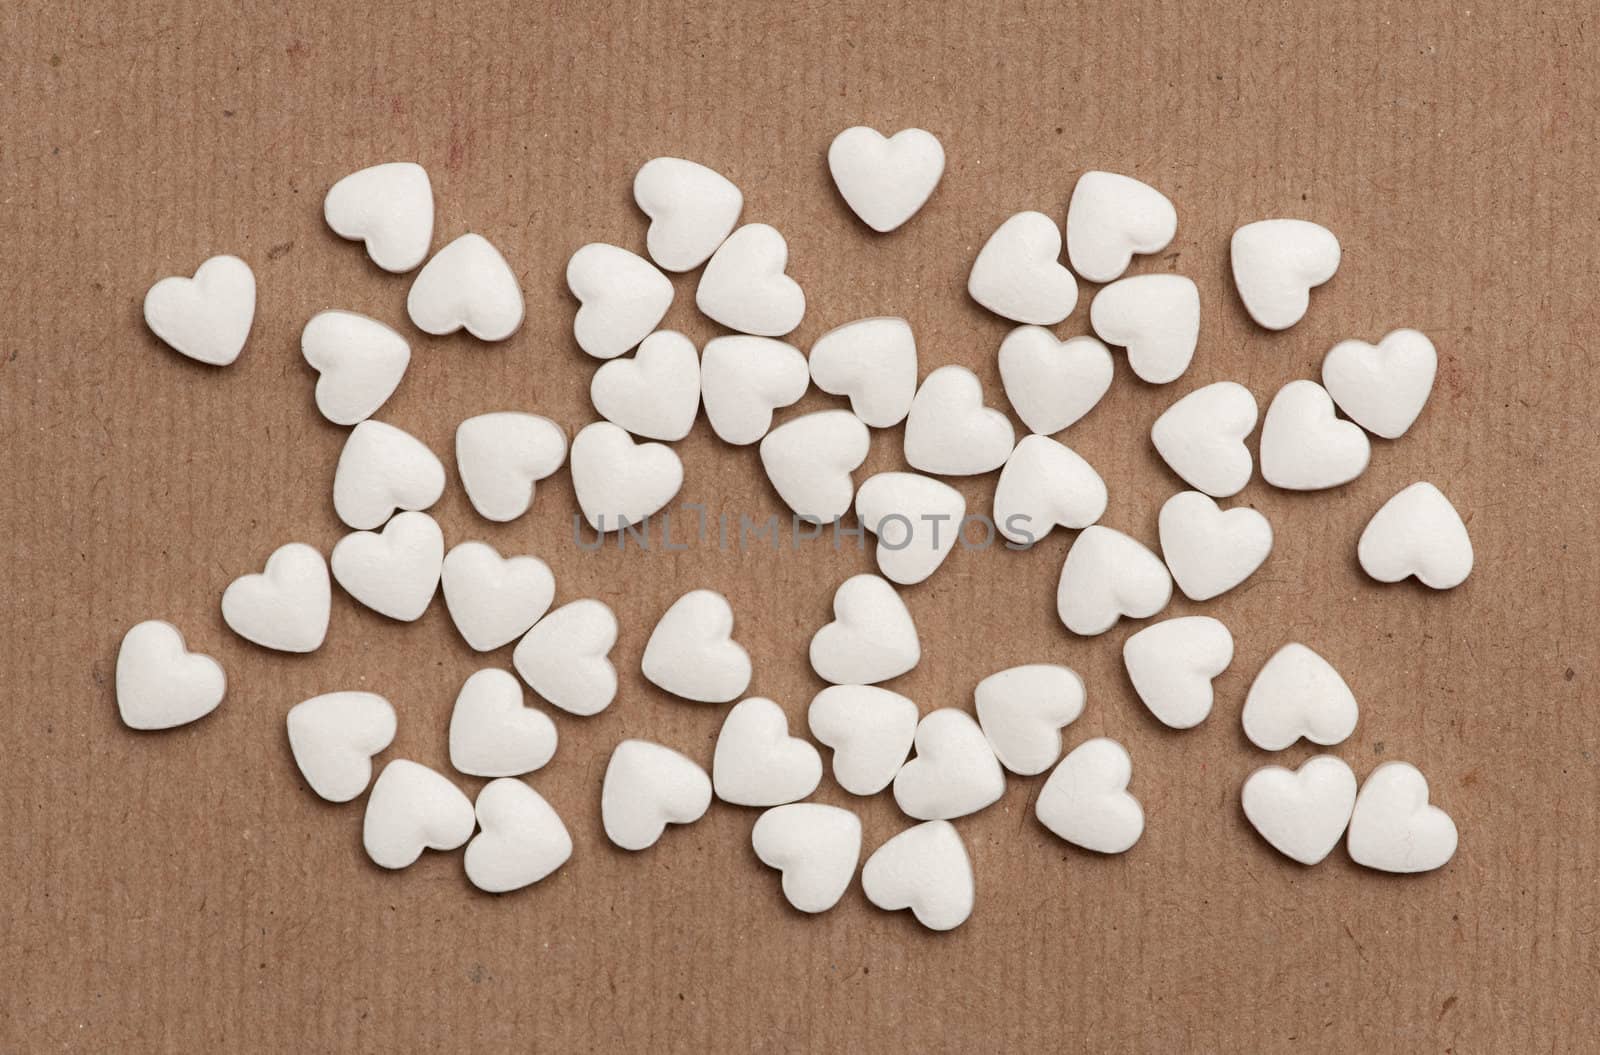 white pills in the form of heart